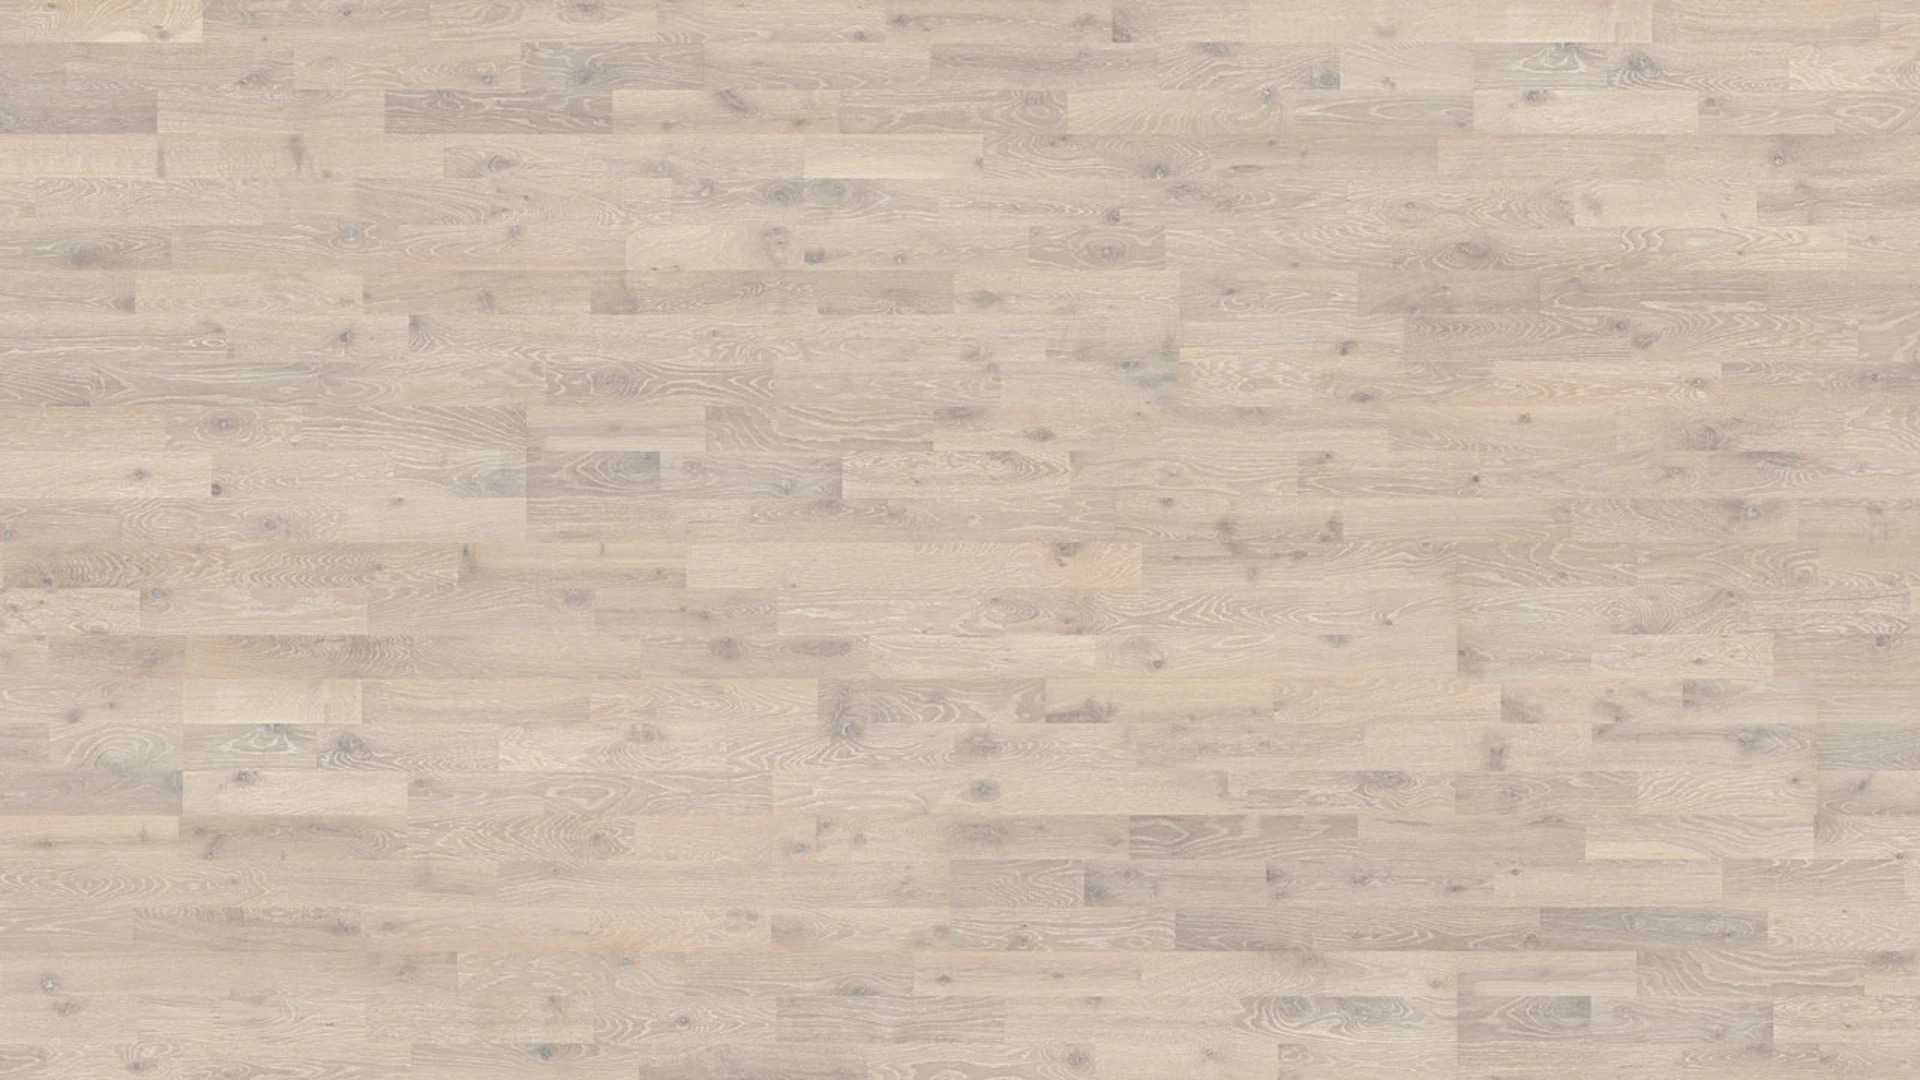 Kährs Parquet - Harmony Collection Quercia Shell (153N6BEKS1KW240)